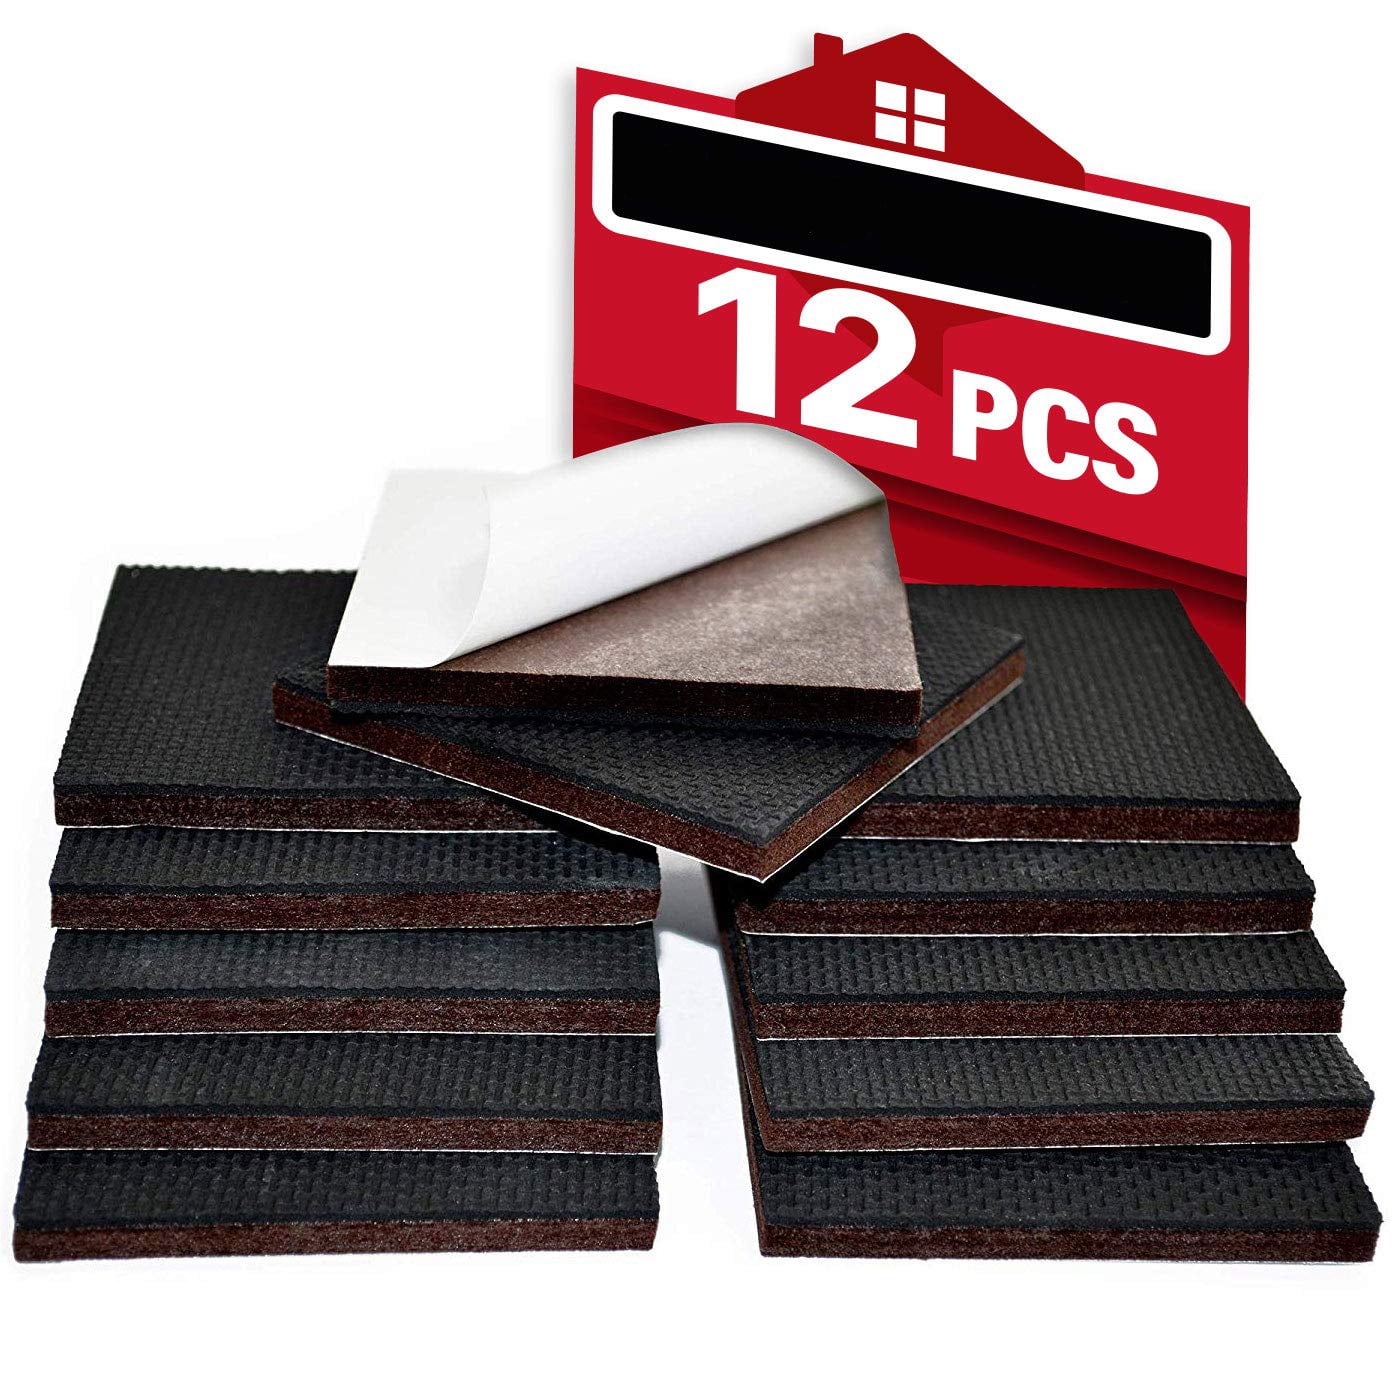 Details about   125 Rubber & Felt Pads Protection Grip Vibration Anti Skid Floor Furniture Feet 